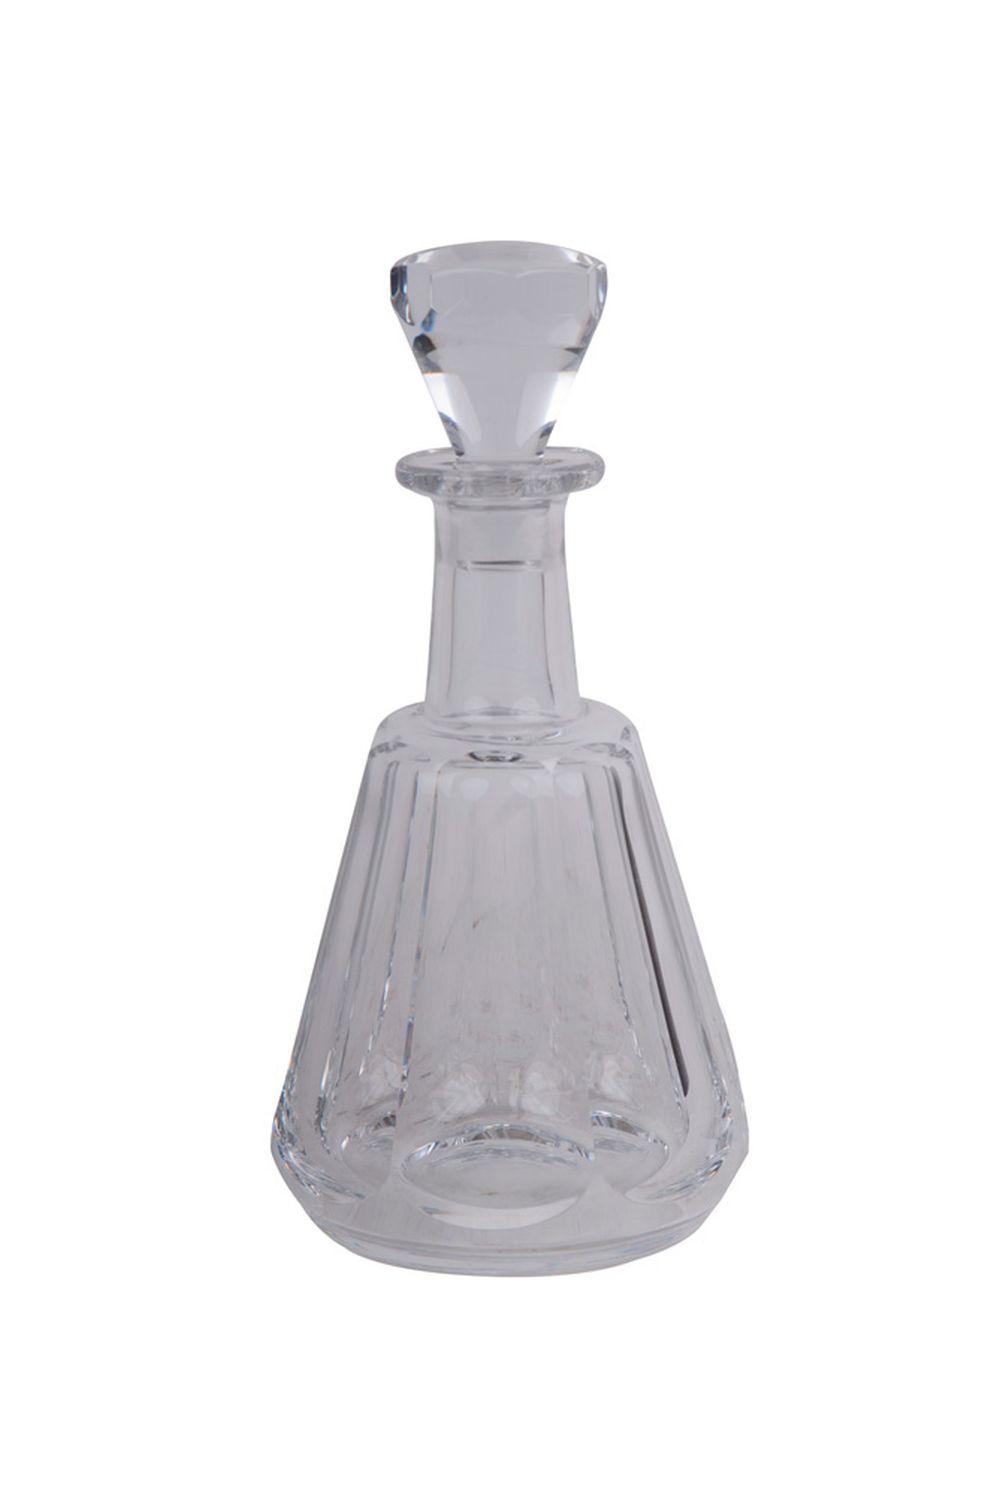 BACCARAT MOLDED GLASS DECANTER10